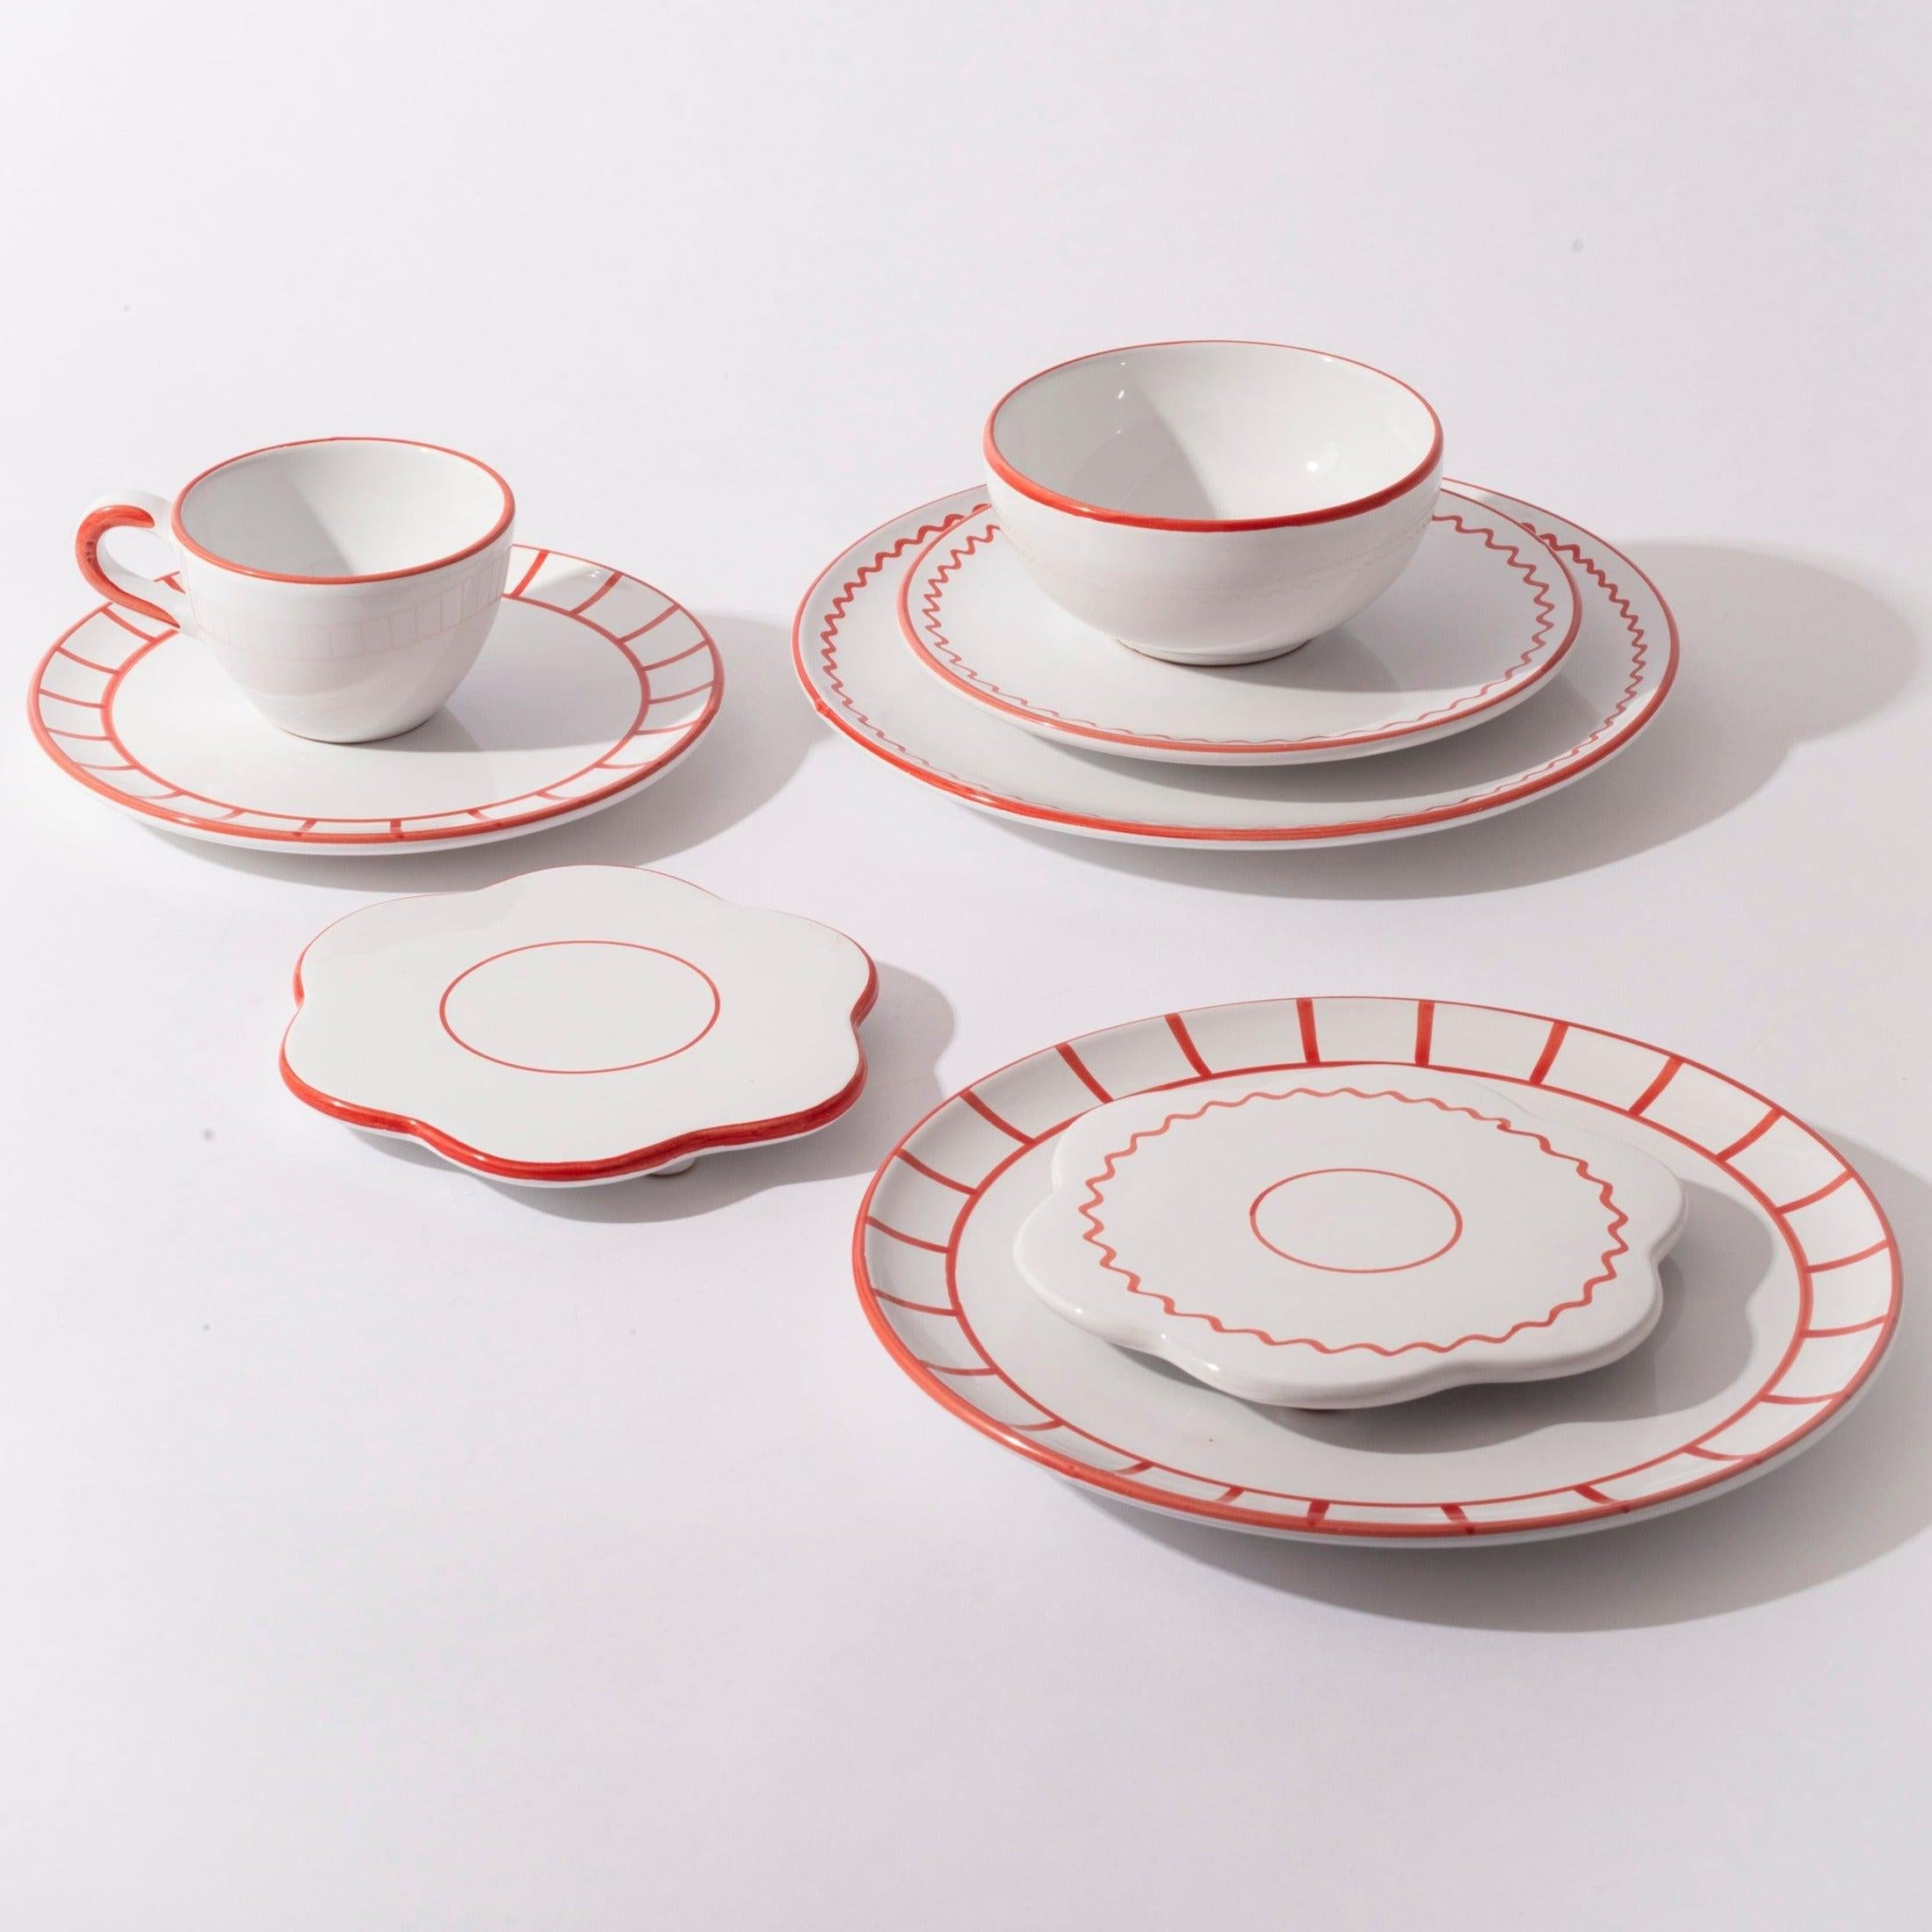 Jore Copenhagen bistro plates are part of the core bistro collection. 
The plate collection is available in 2 sizes and comes in 2 prints in 3 colors. All items can be mixed and matched between prints or colors, or used in sets. 

The lunch plate